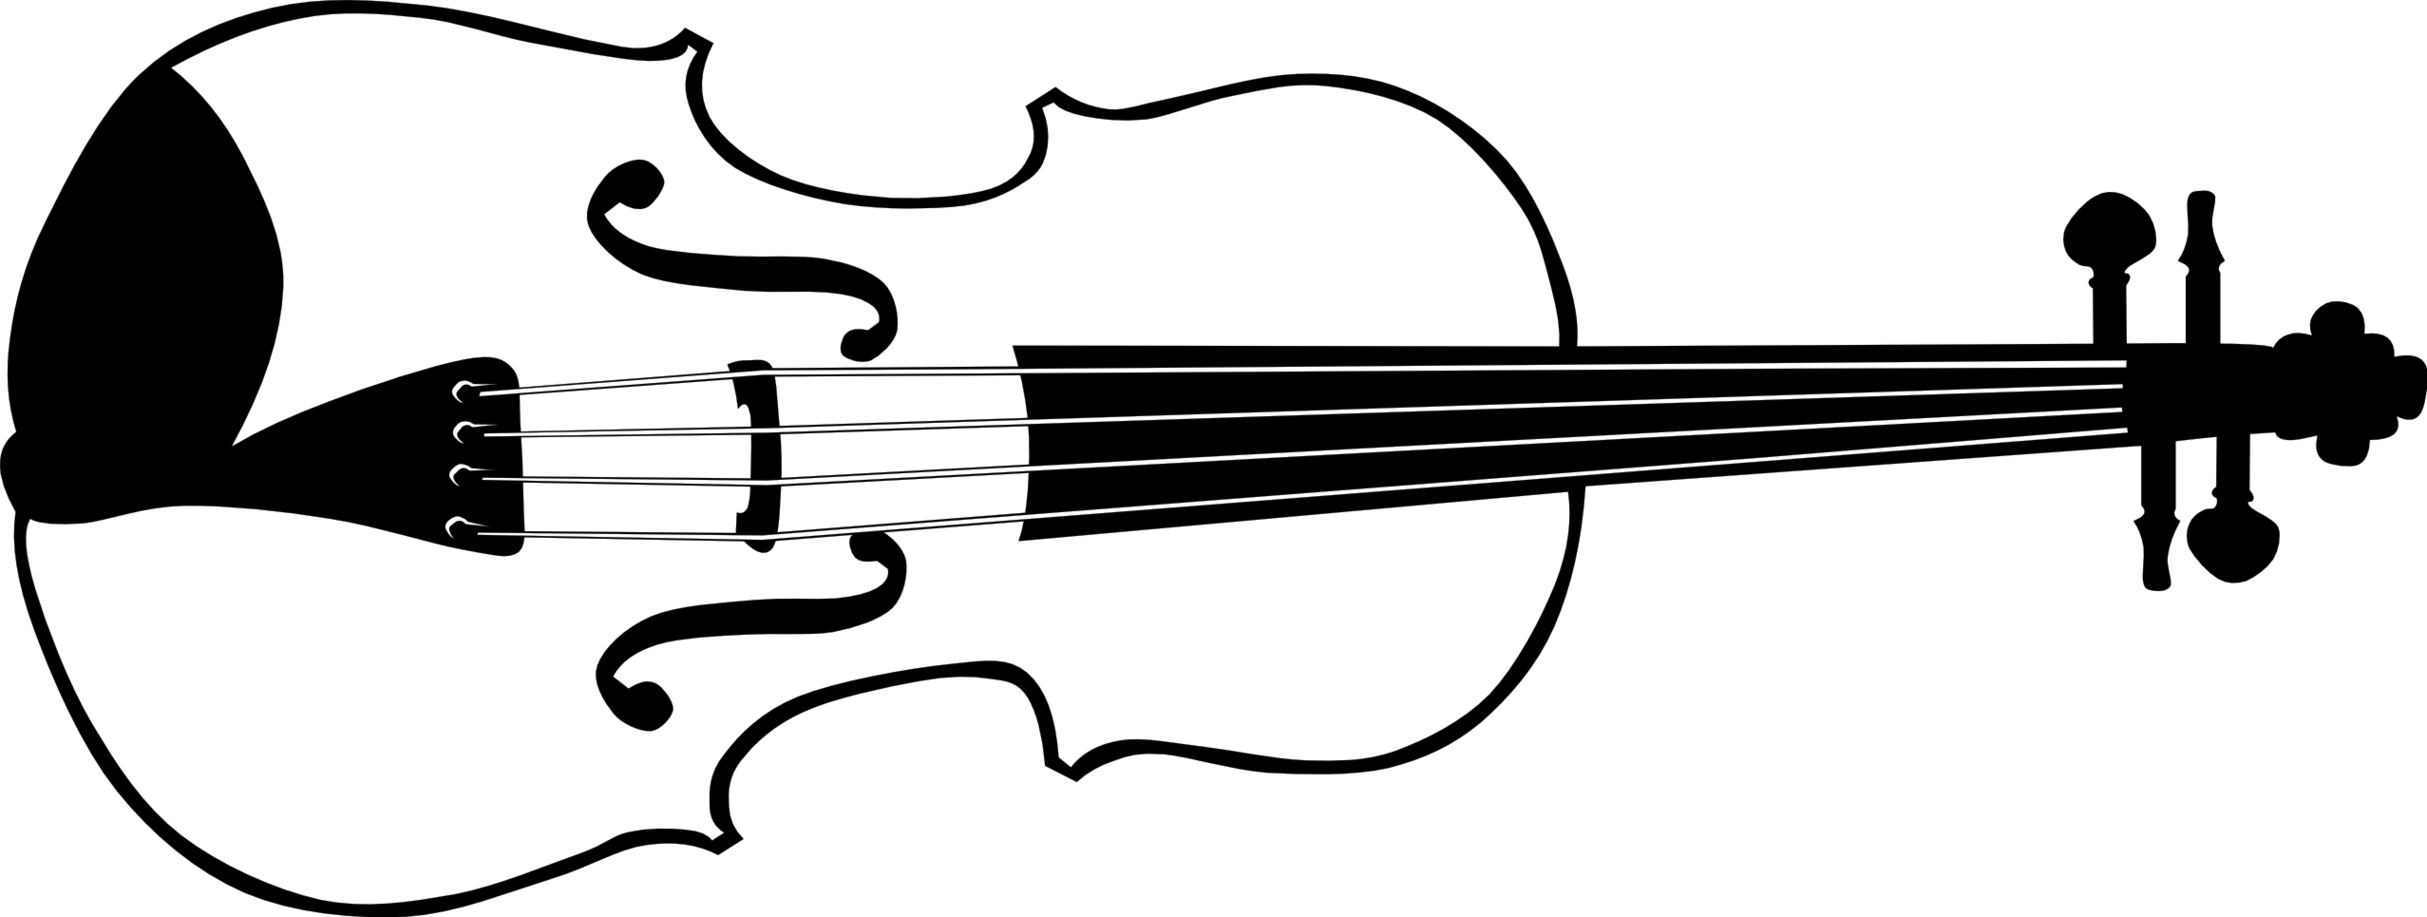 Violin clipart free to use clip art resource